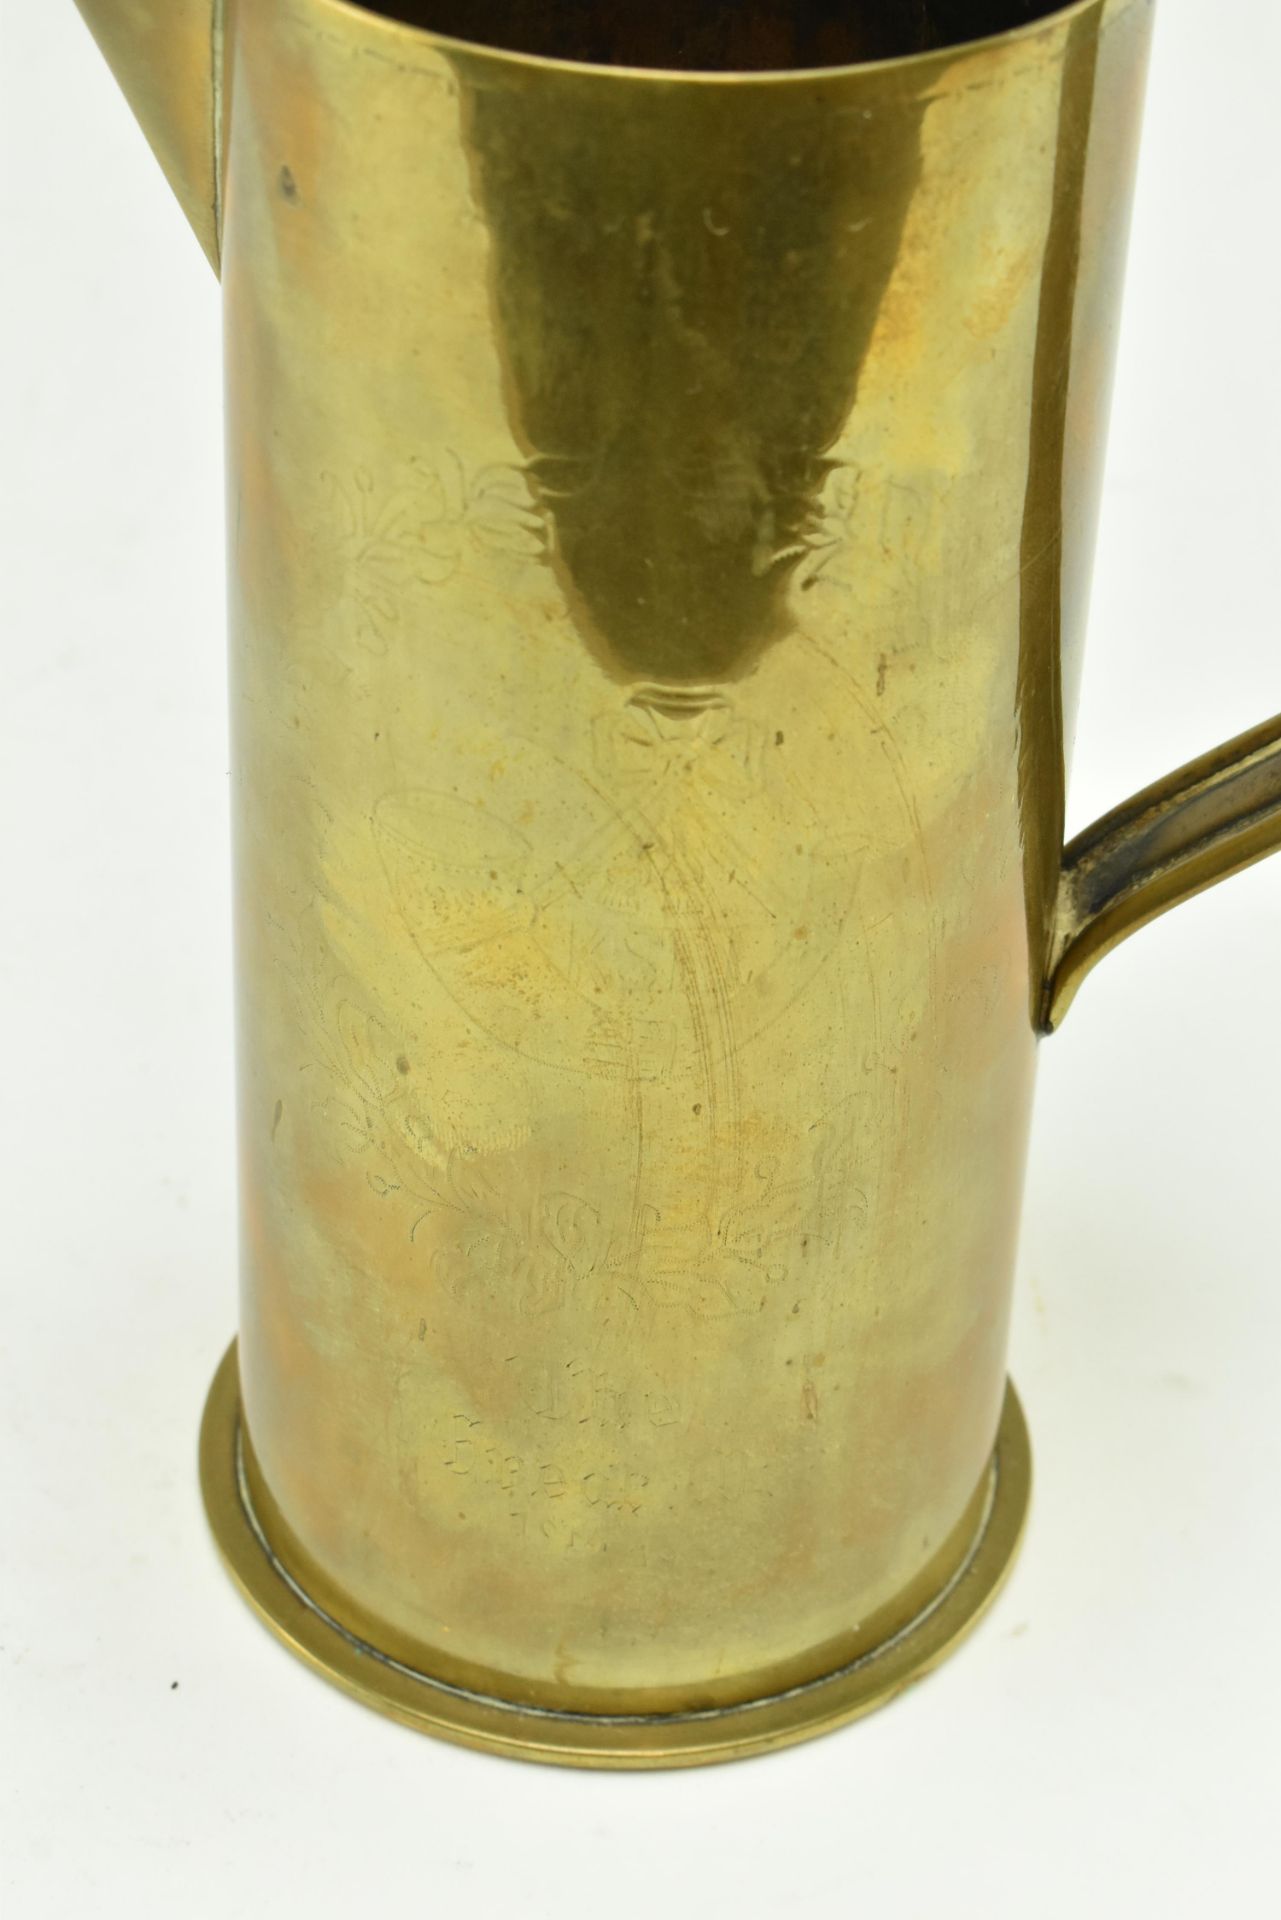 TRENCH ART - COLLECTION OF SIX WWI REPURPOSED ARTILLERY SHELL - Image 8 of 9